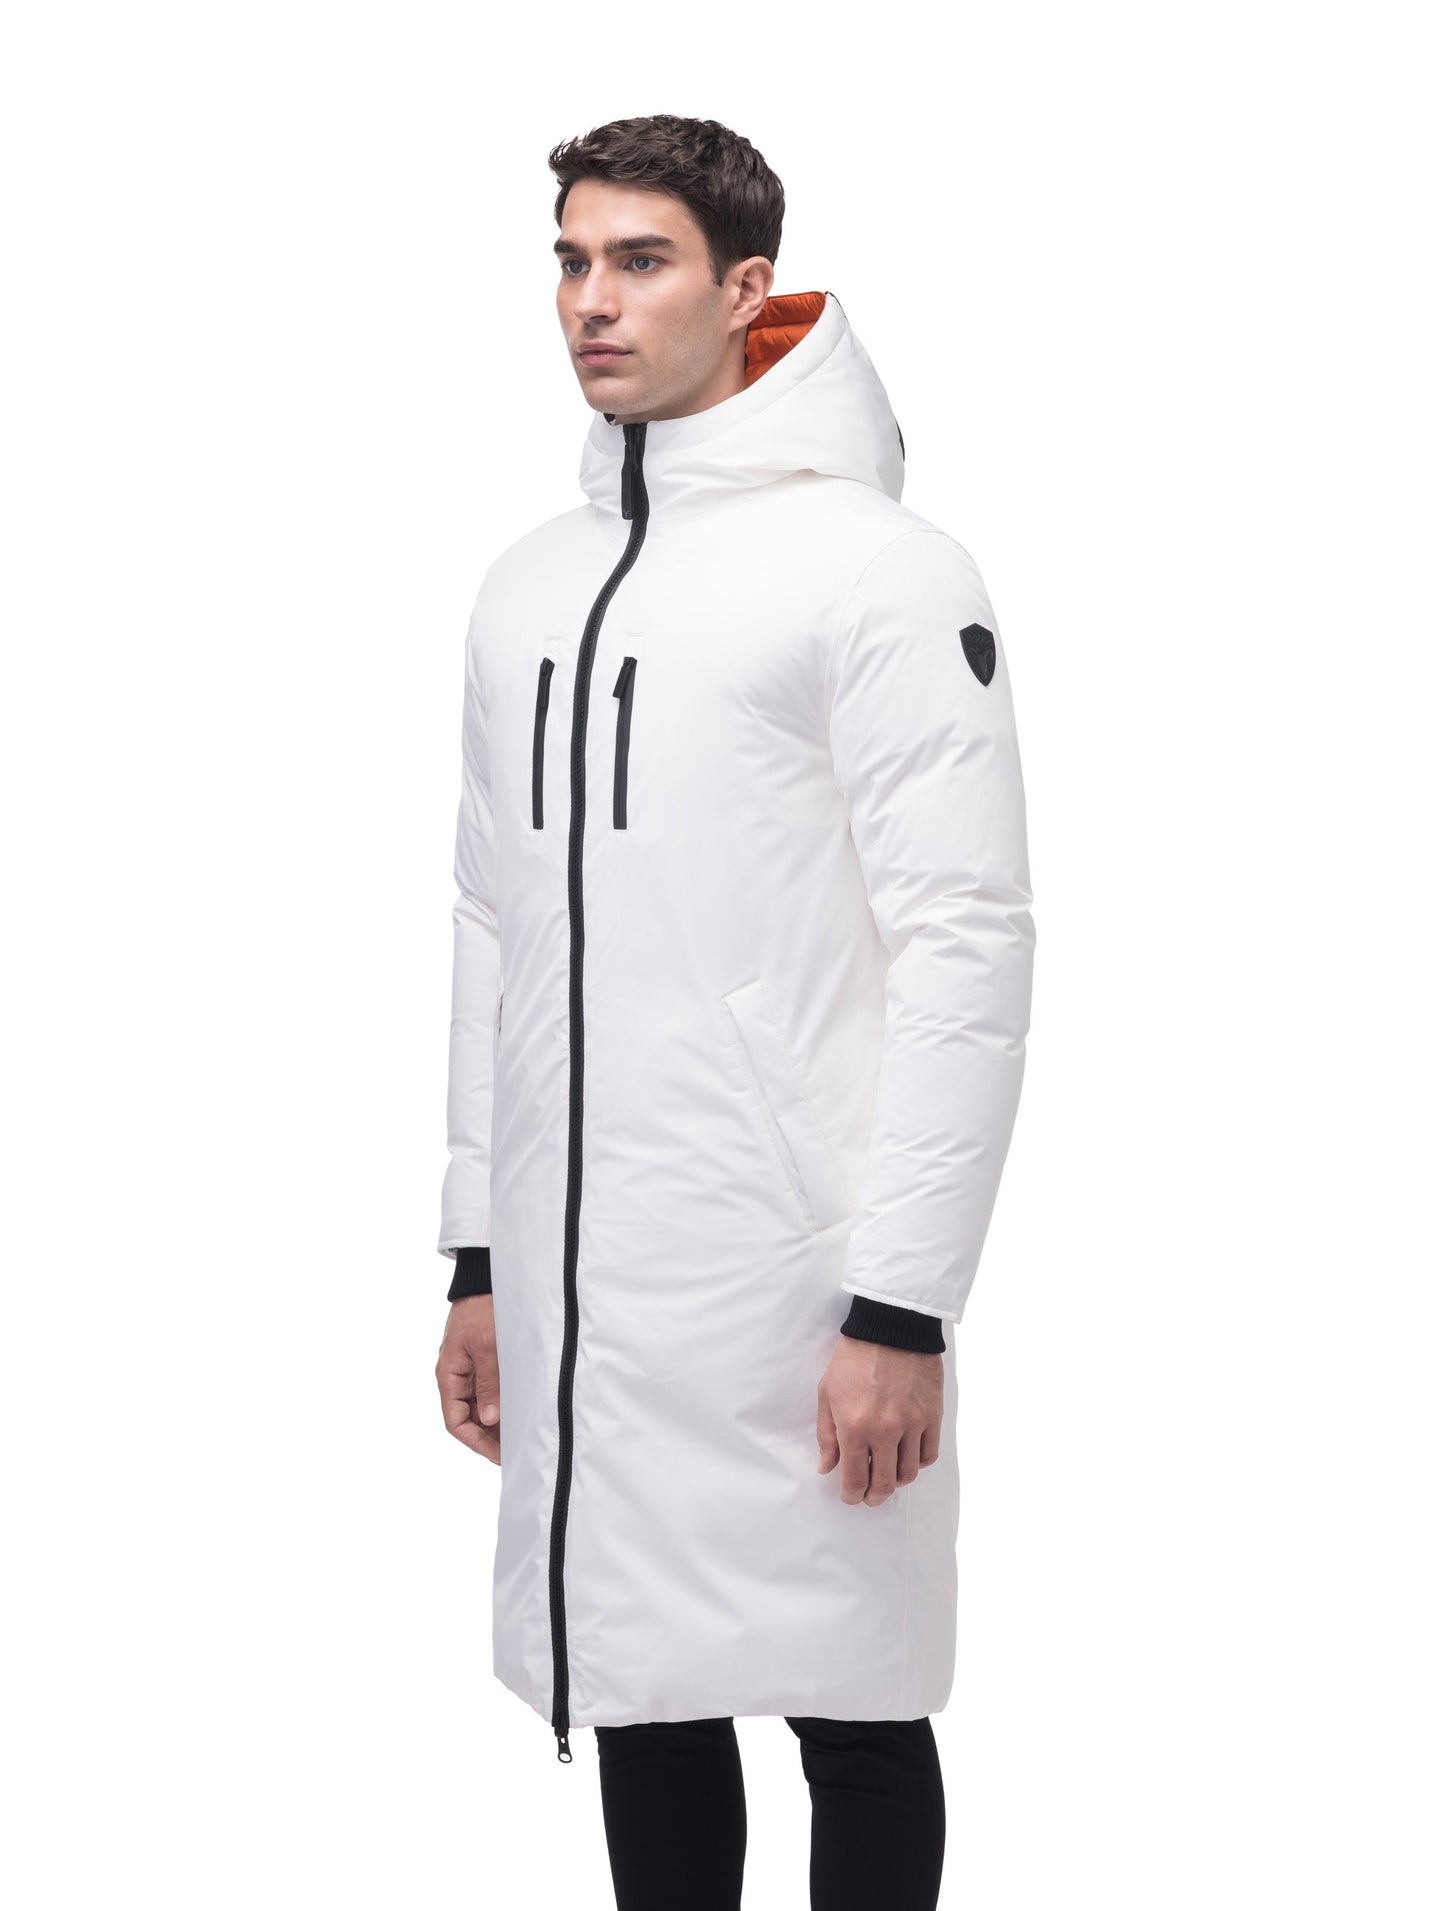 Men's knee length reversible down-filled parka with non-removable hood in Chalk/Atomic